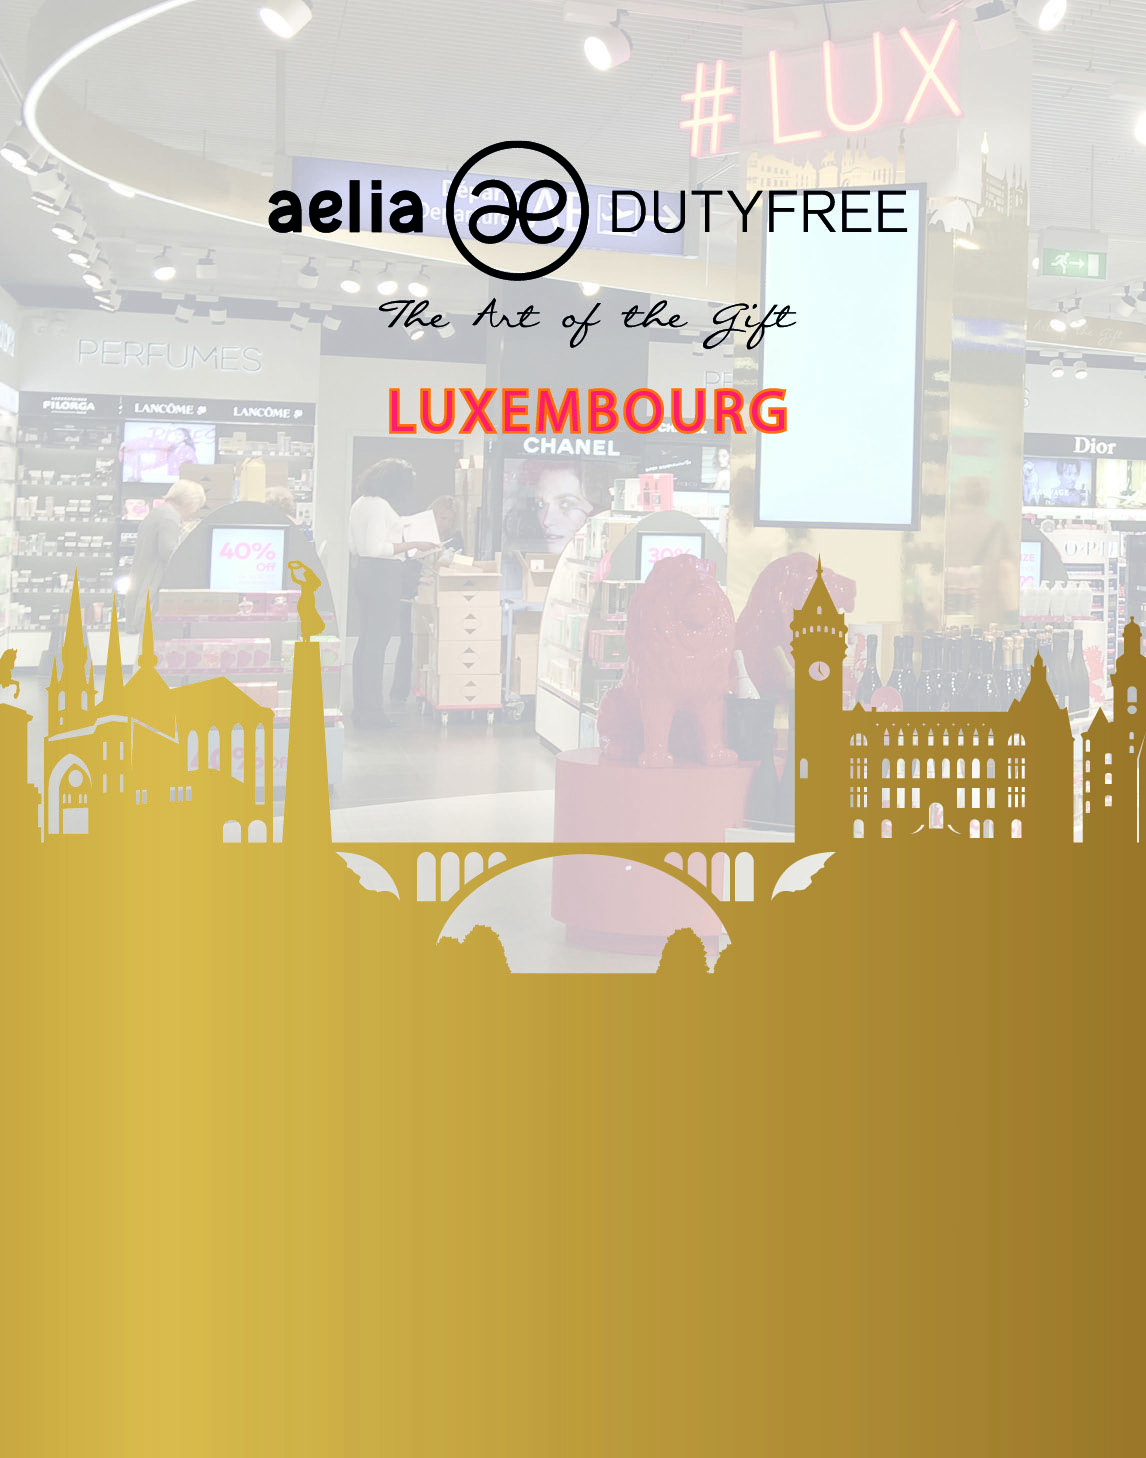 Specials Promotions Are Waiting For You At Aelia Duty-Free Stores From Now Until 19.10.20